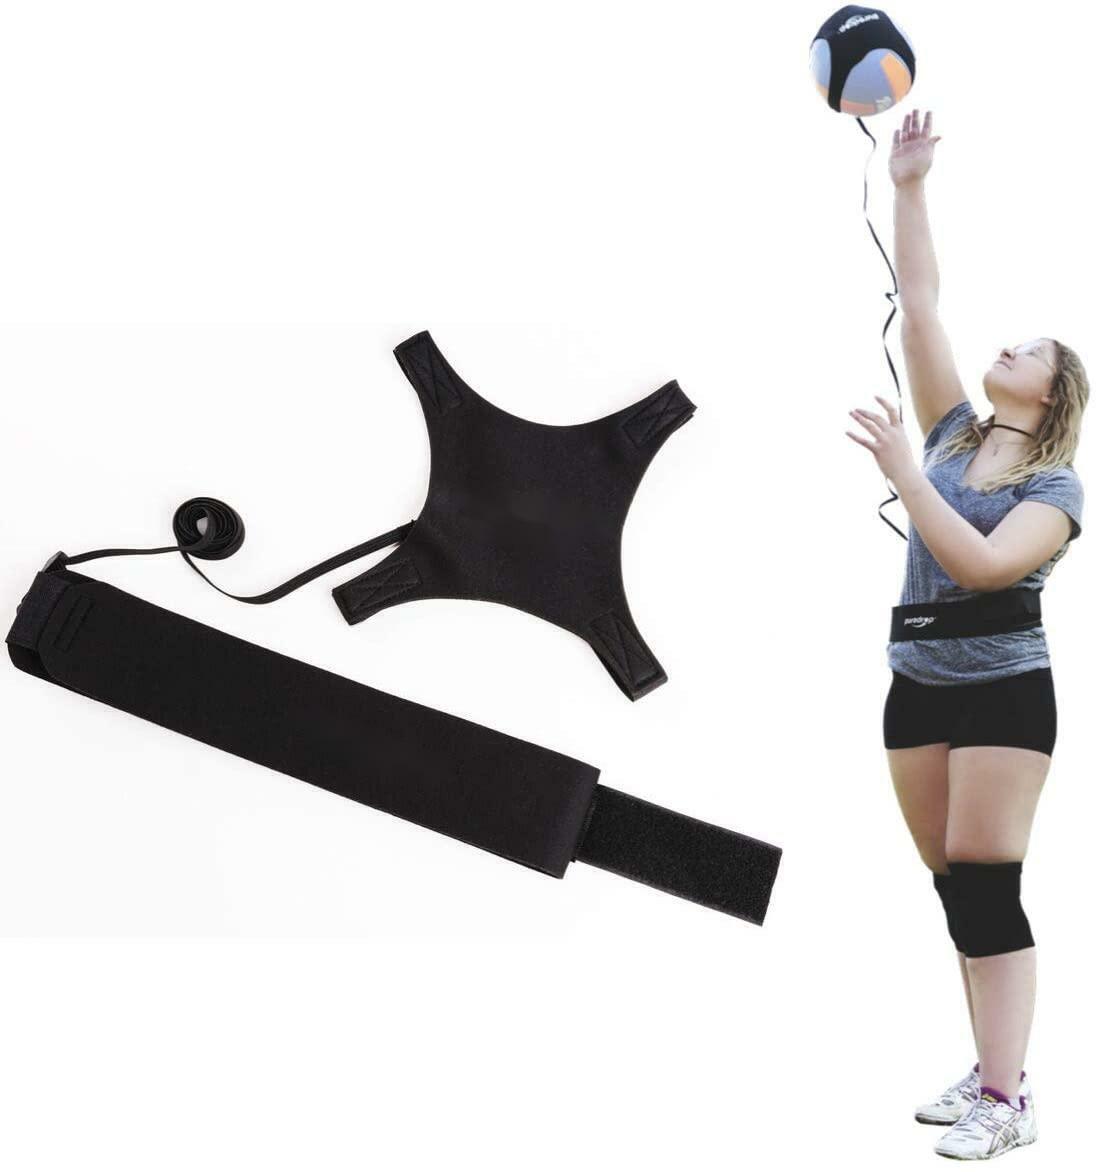 Volleyball Training Pass Rite Aid Resistance Band, Elastic Practicing Training